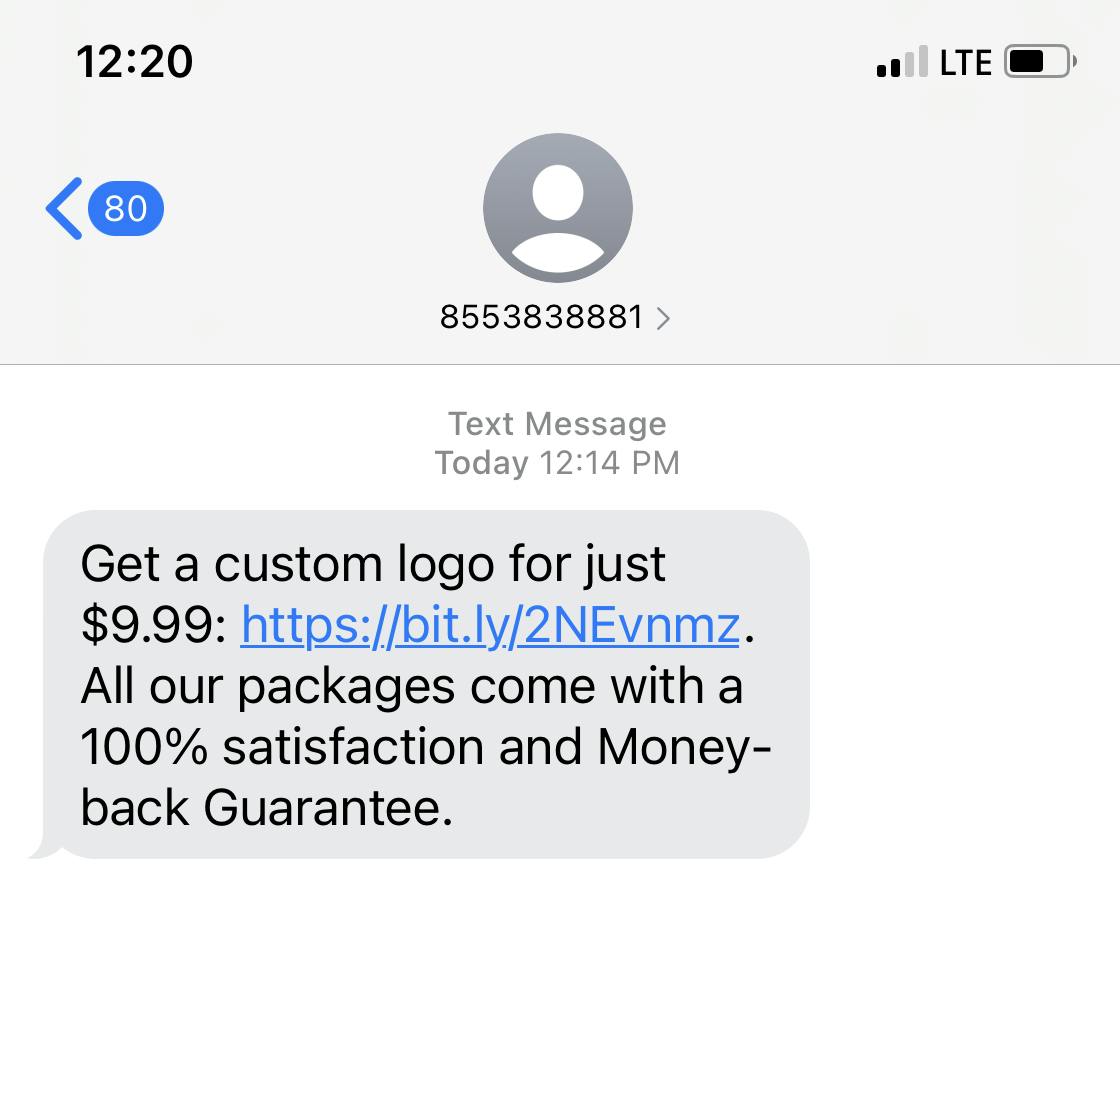 A text message spam offering a logo for ridiculously low price